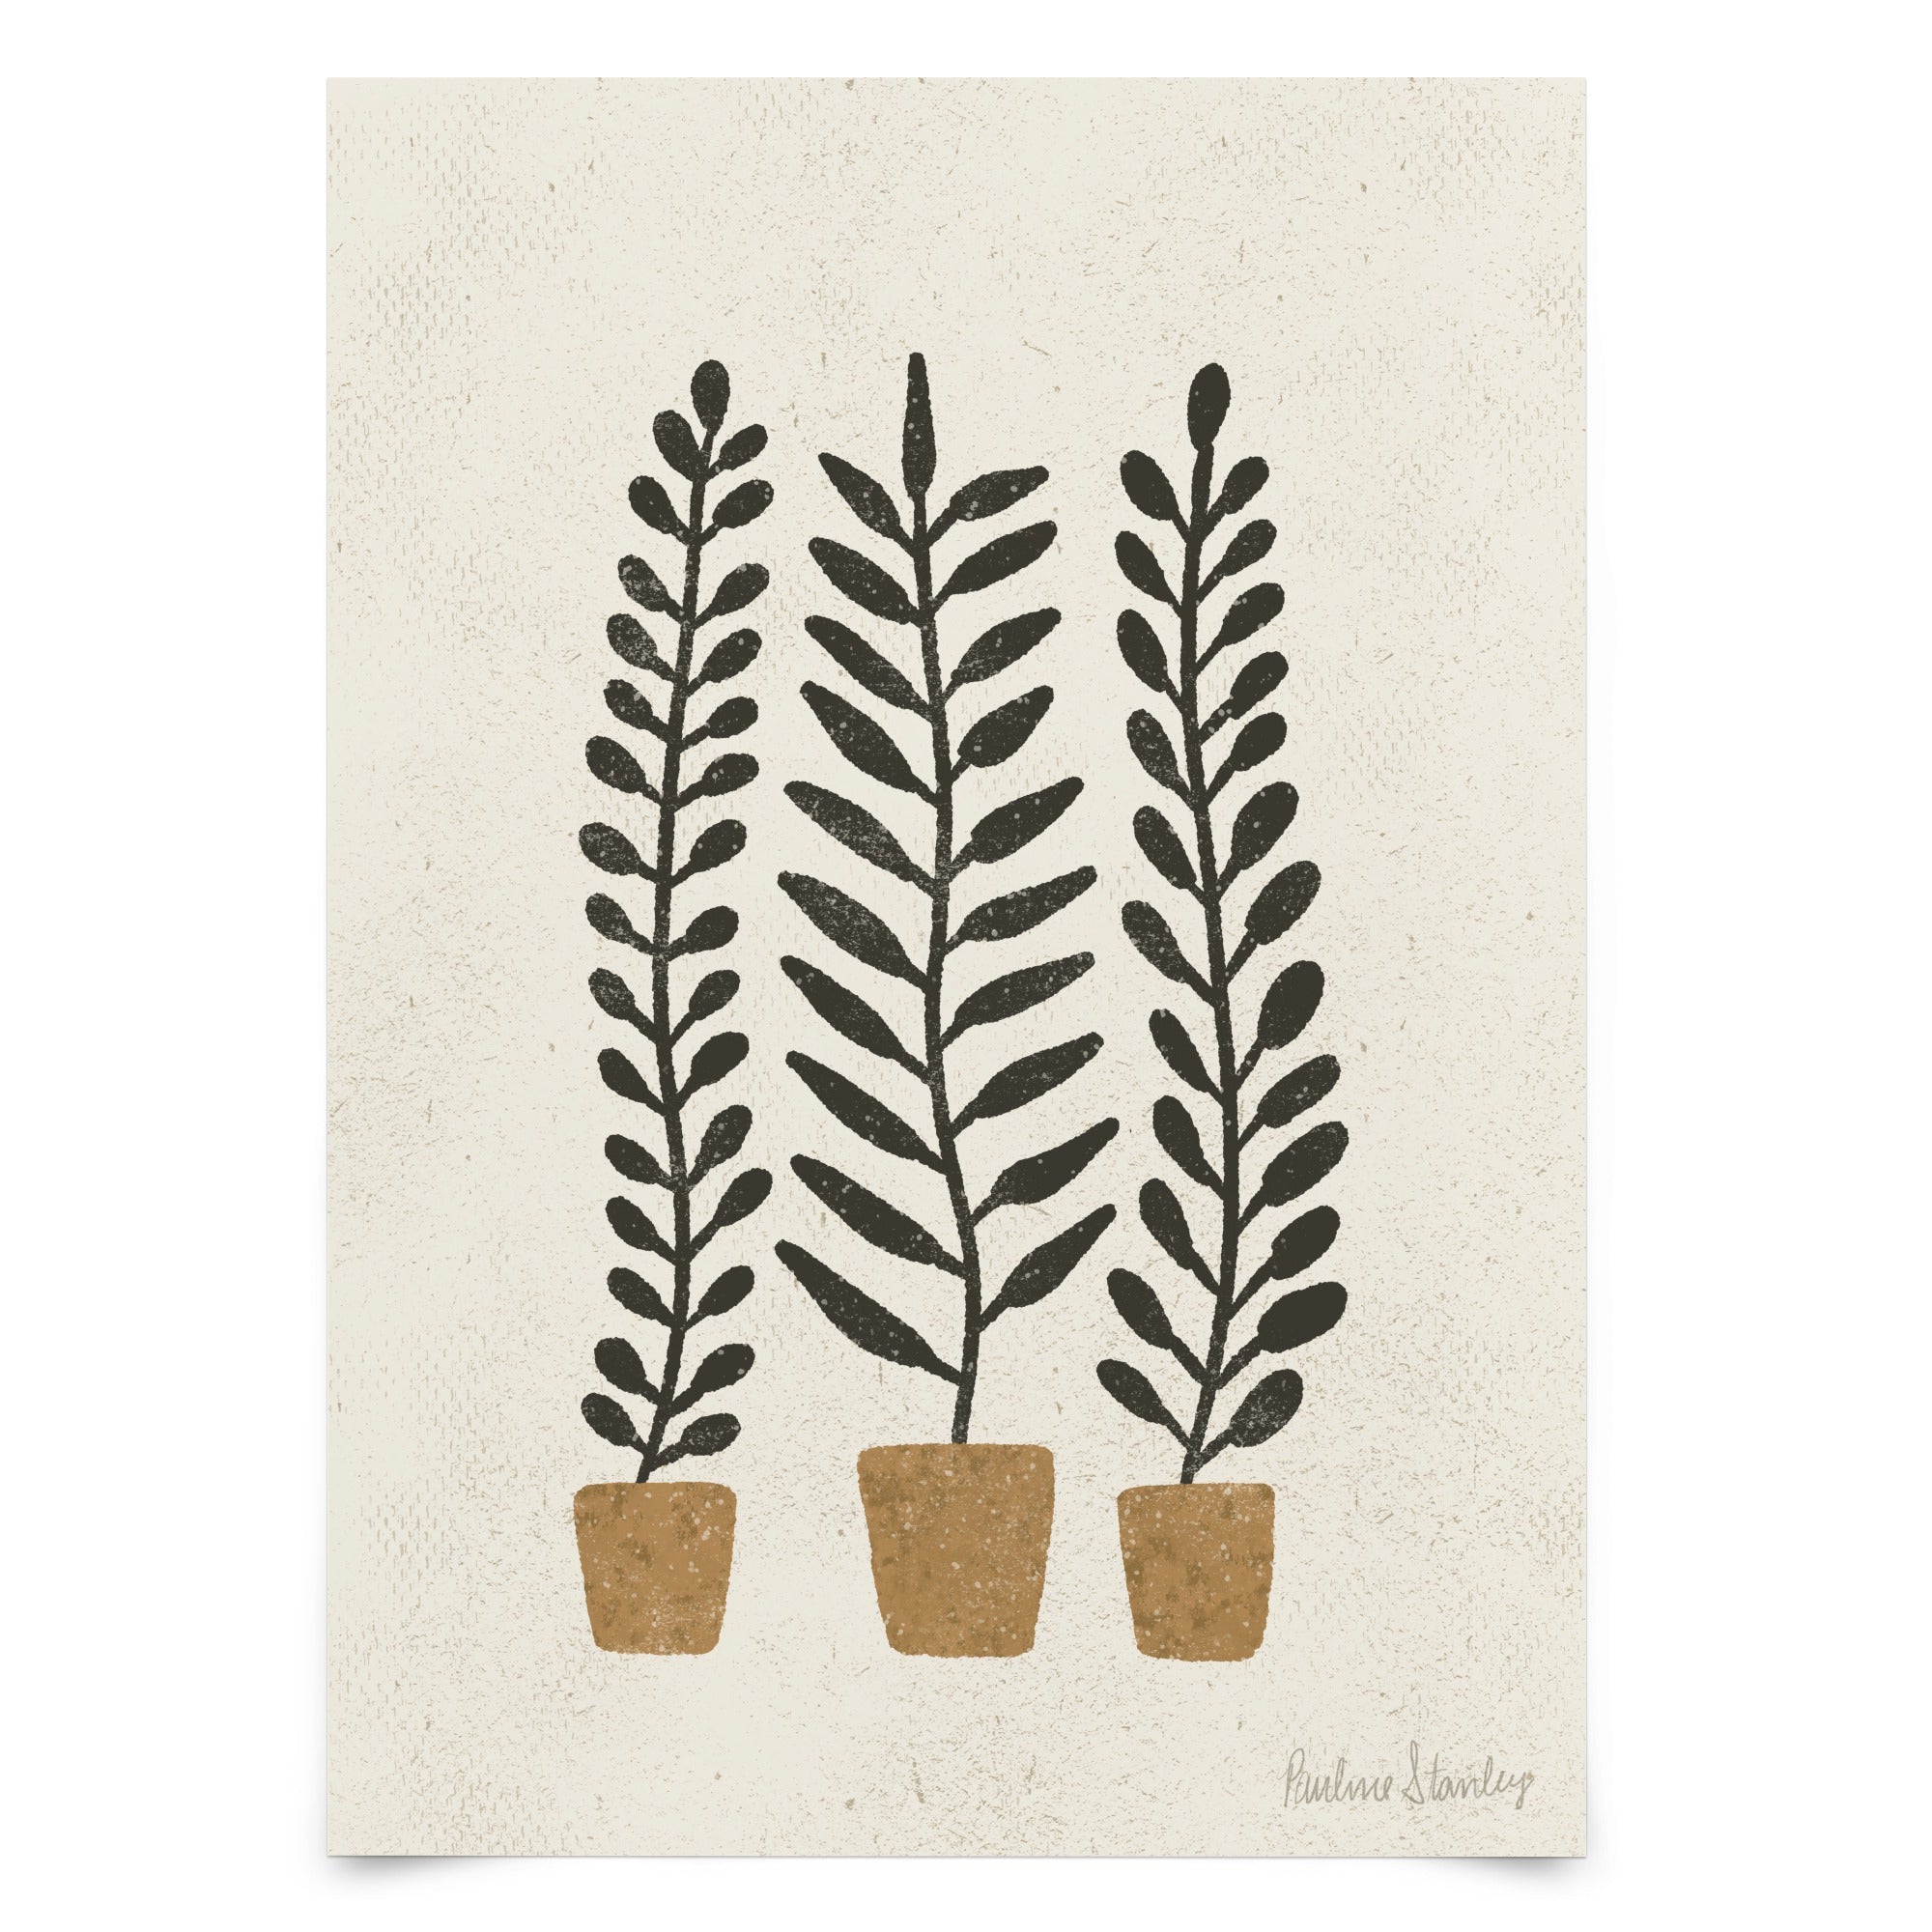 Potted Ferns Terracotta Black by Pauline Stanley - Art Print - Americanflat